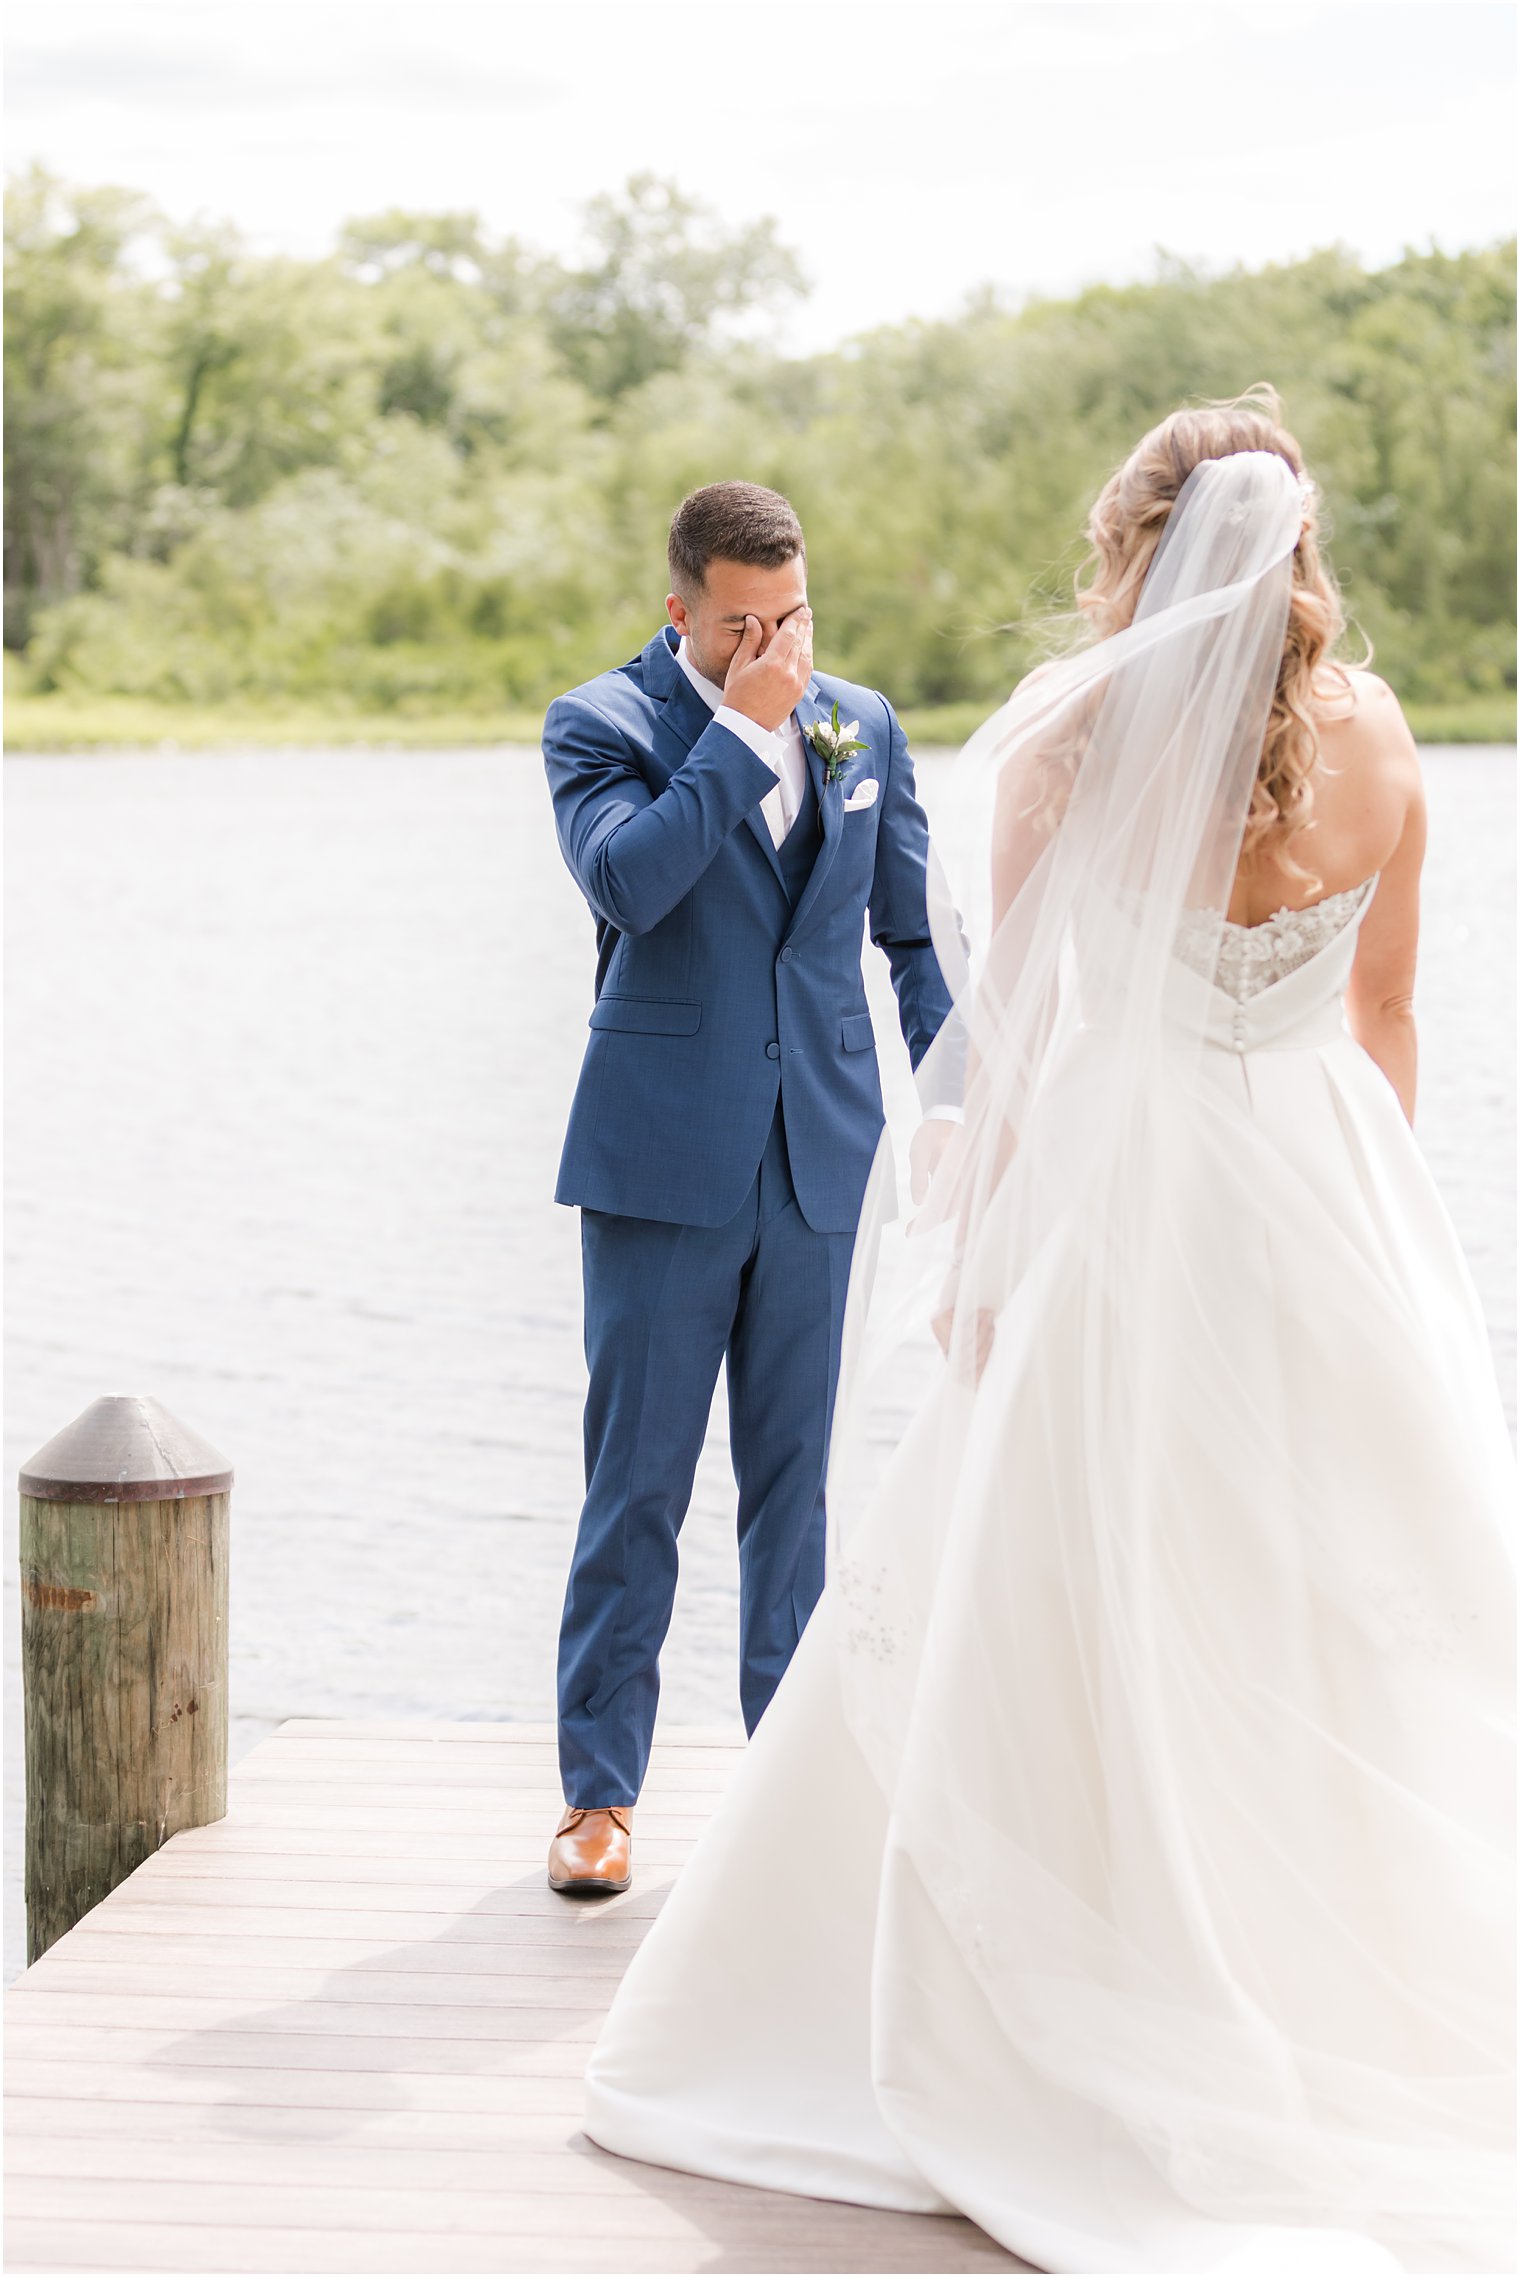 groom cries during first look seeing bride for first time